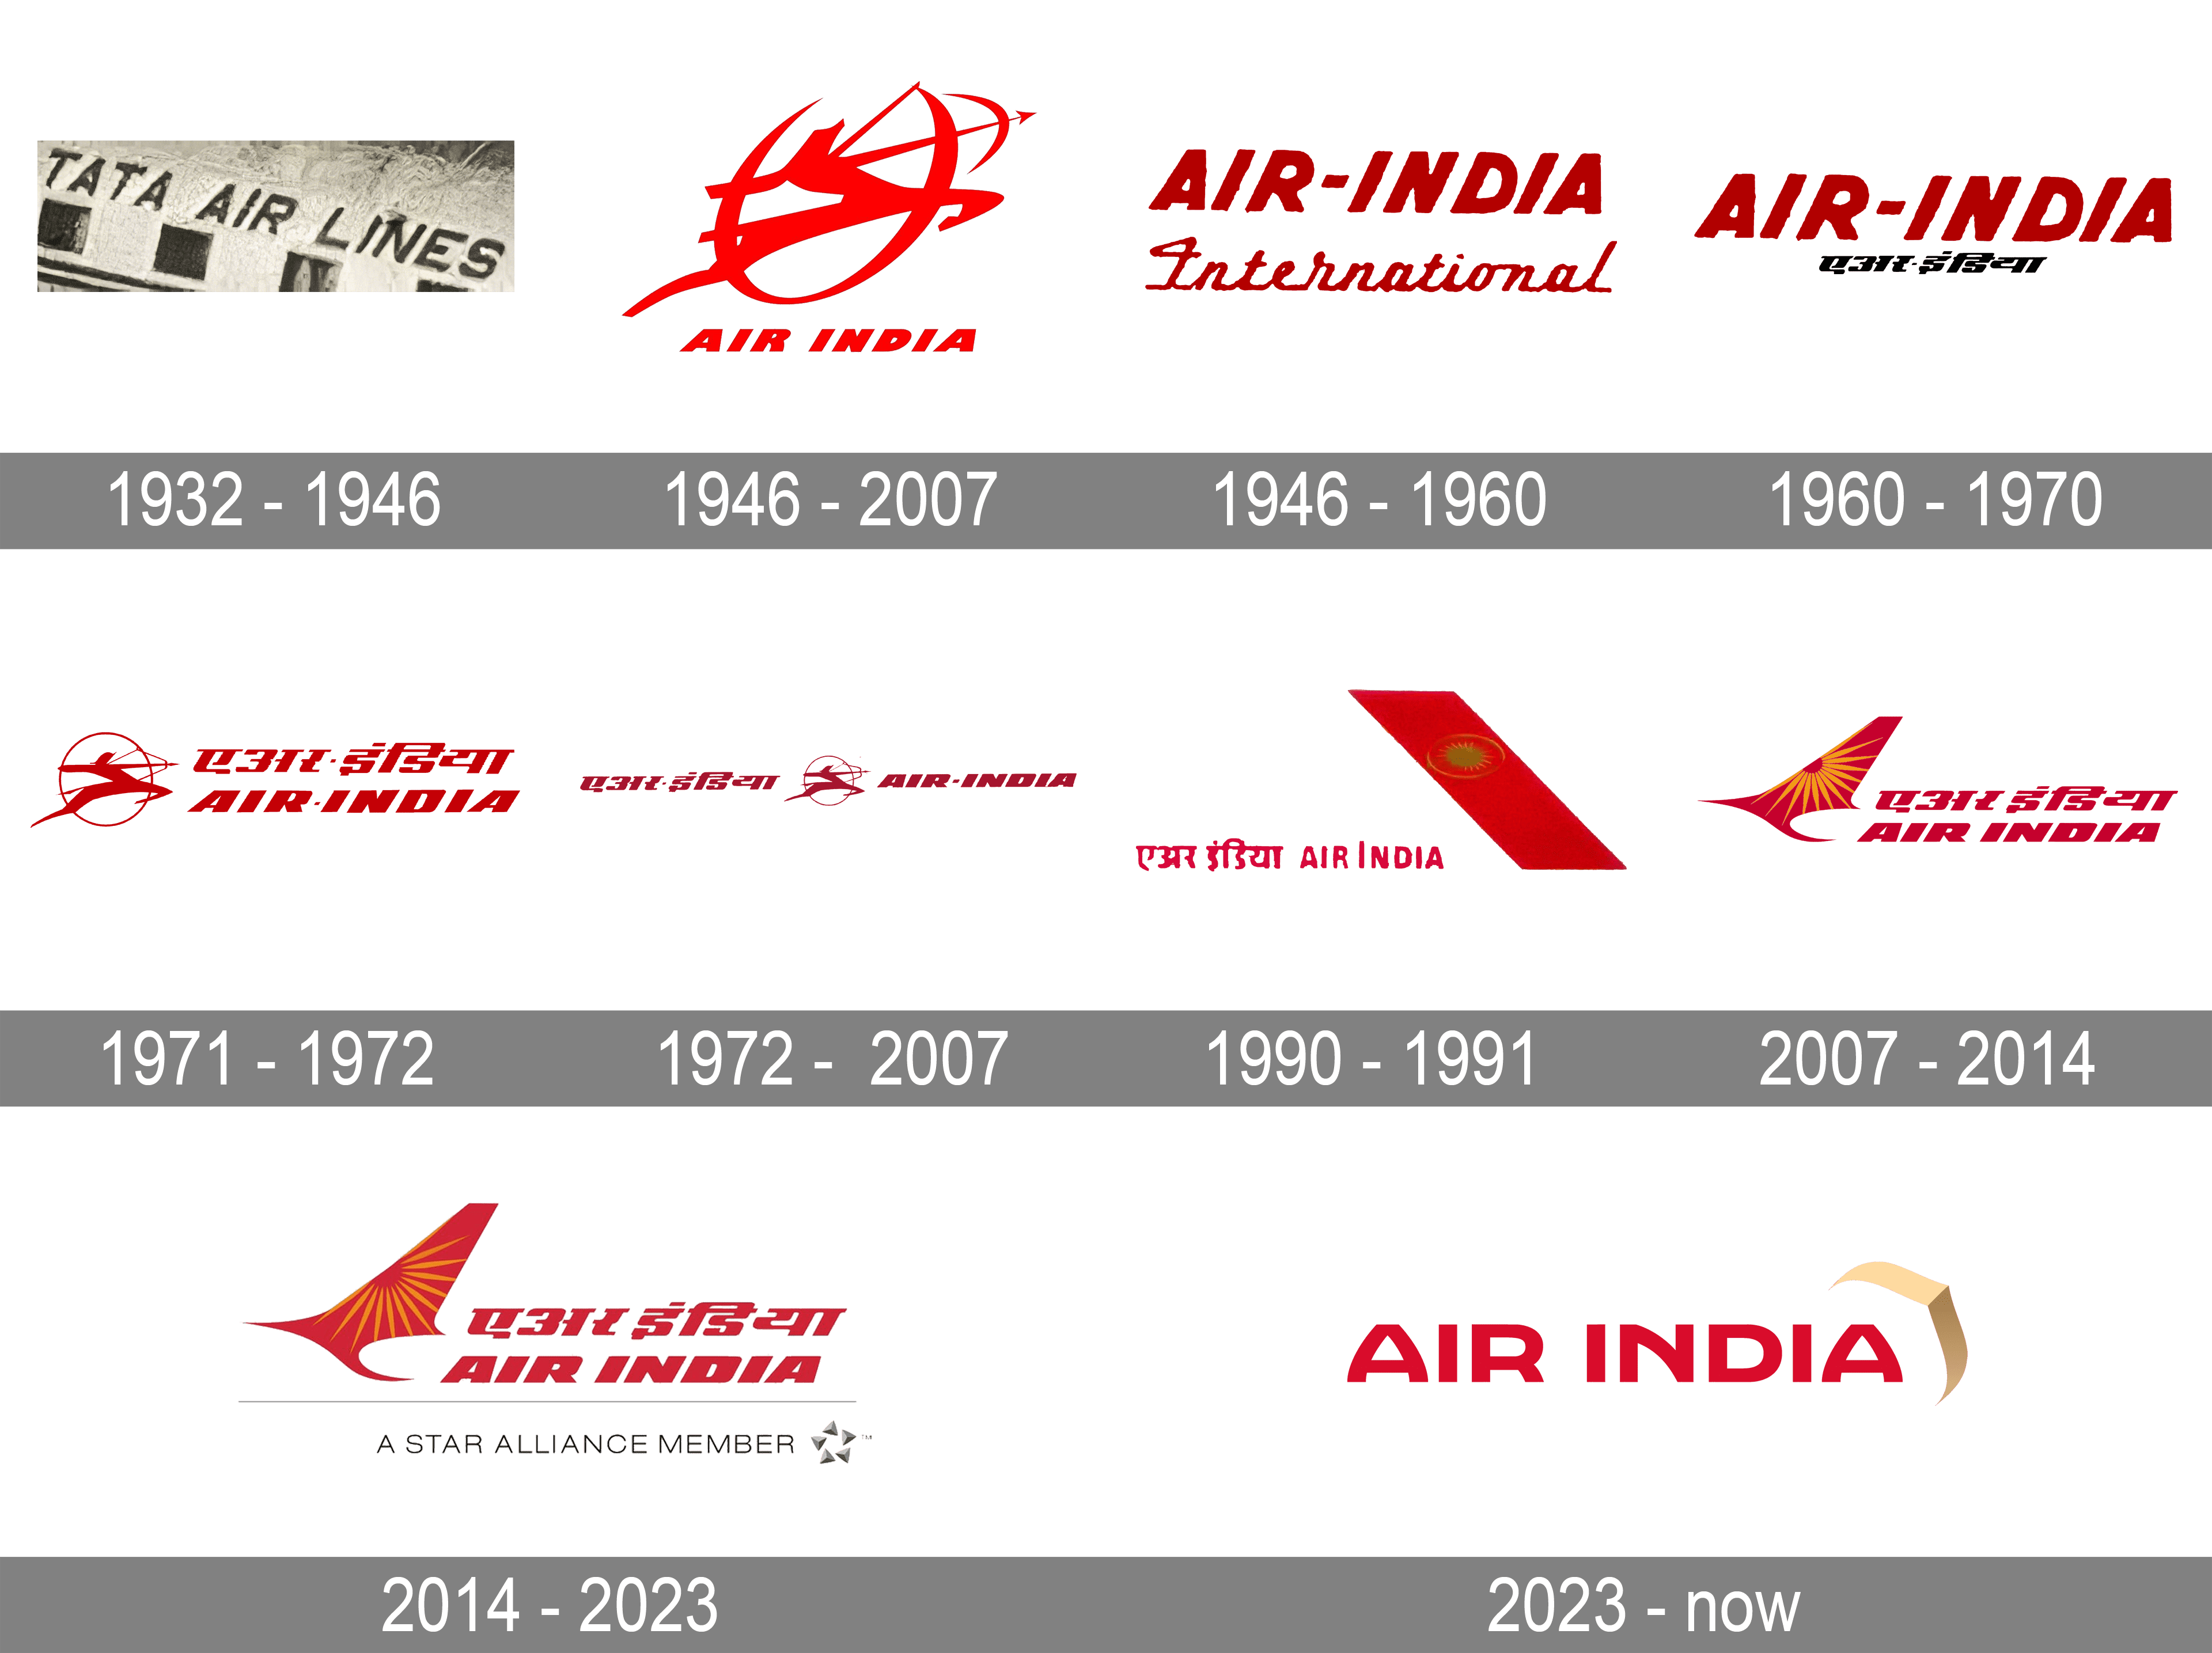 Air India Sets Out Really Ambitious Goals for Itself in New Turnaround Plan